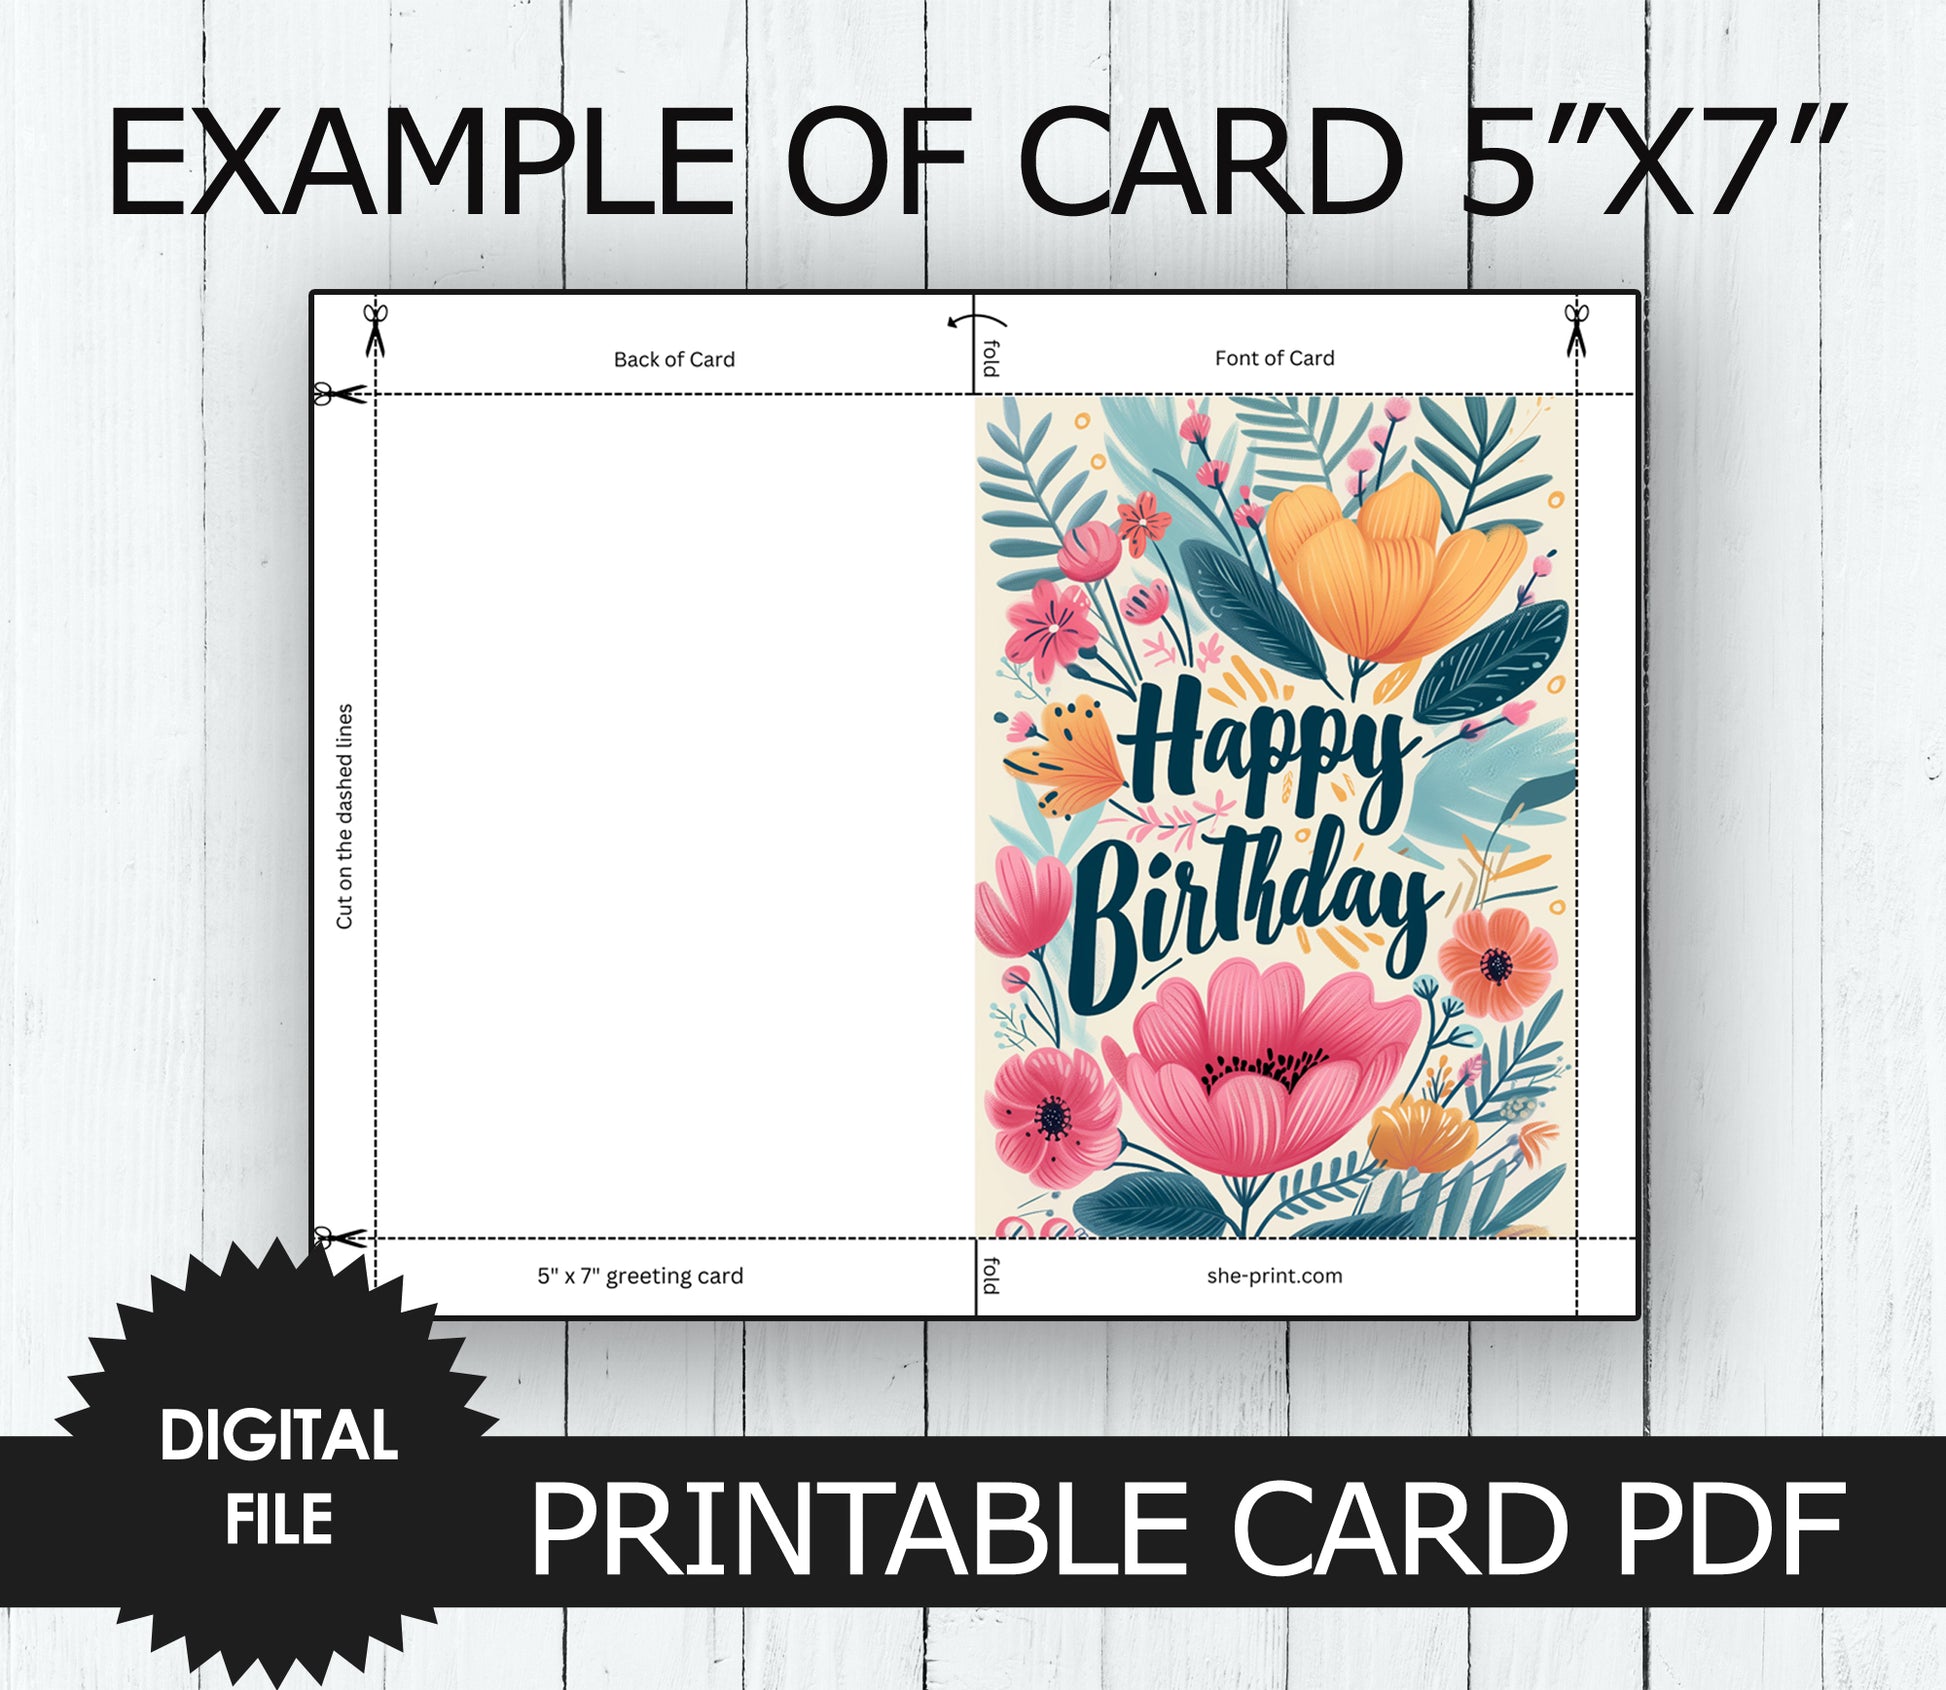 Example of printable card 5x7, print at home